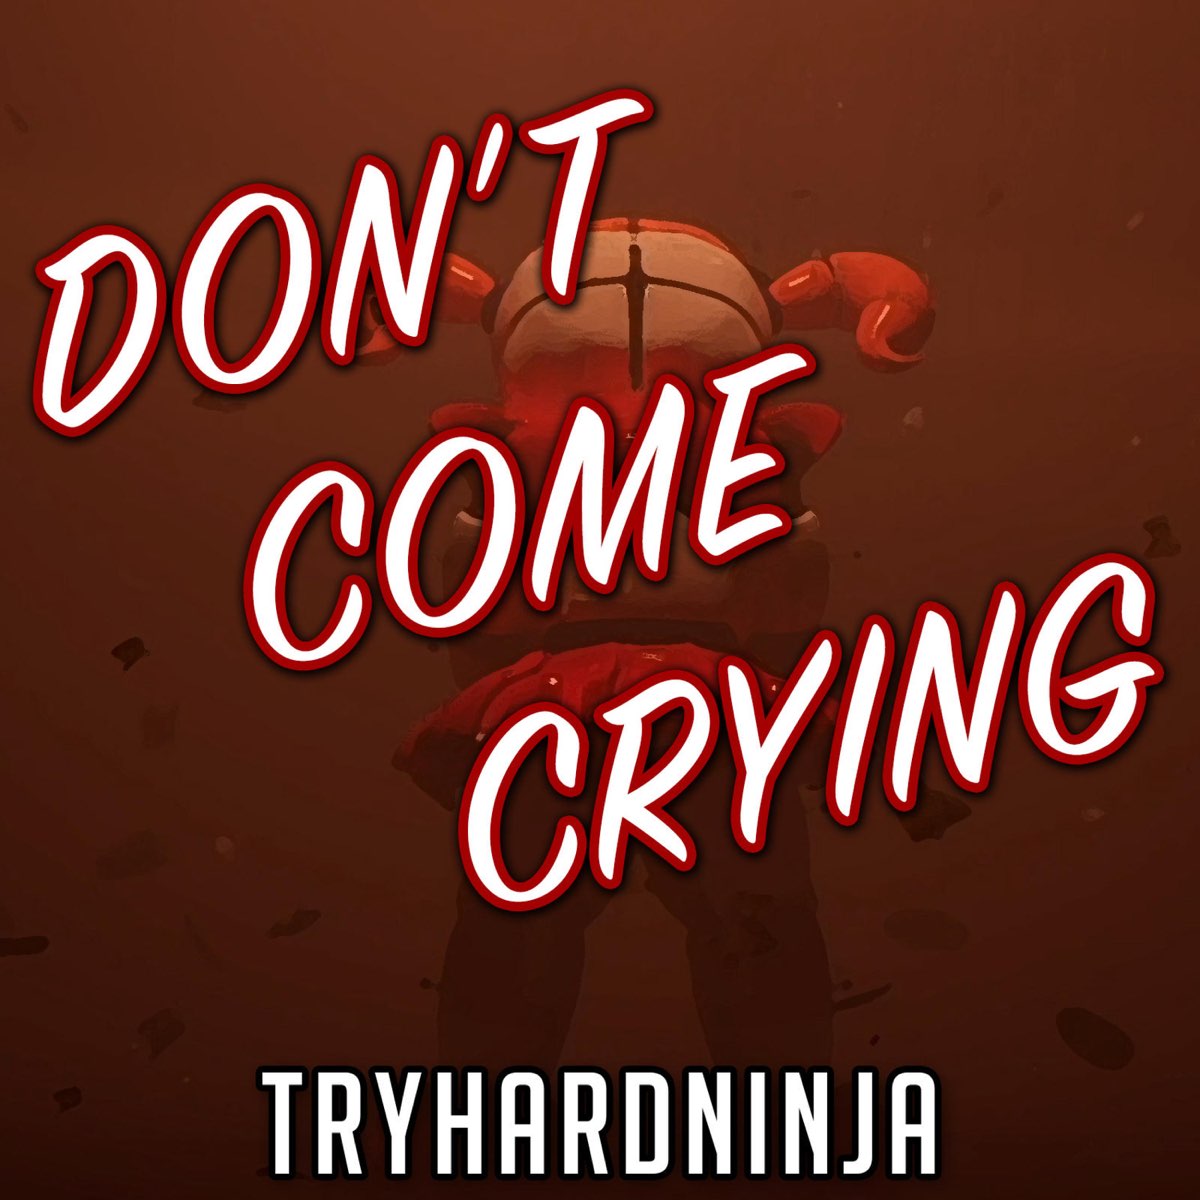 Музыка dont. Don't come crying. Don't come crying ФНАФ. Don't come crying TRYHARDNINJA. "Don' come crying".